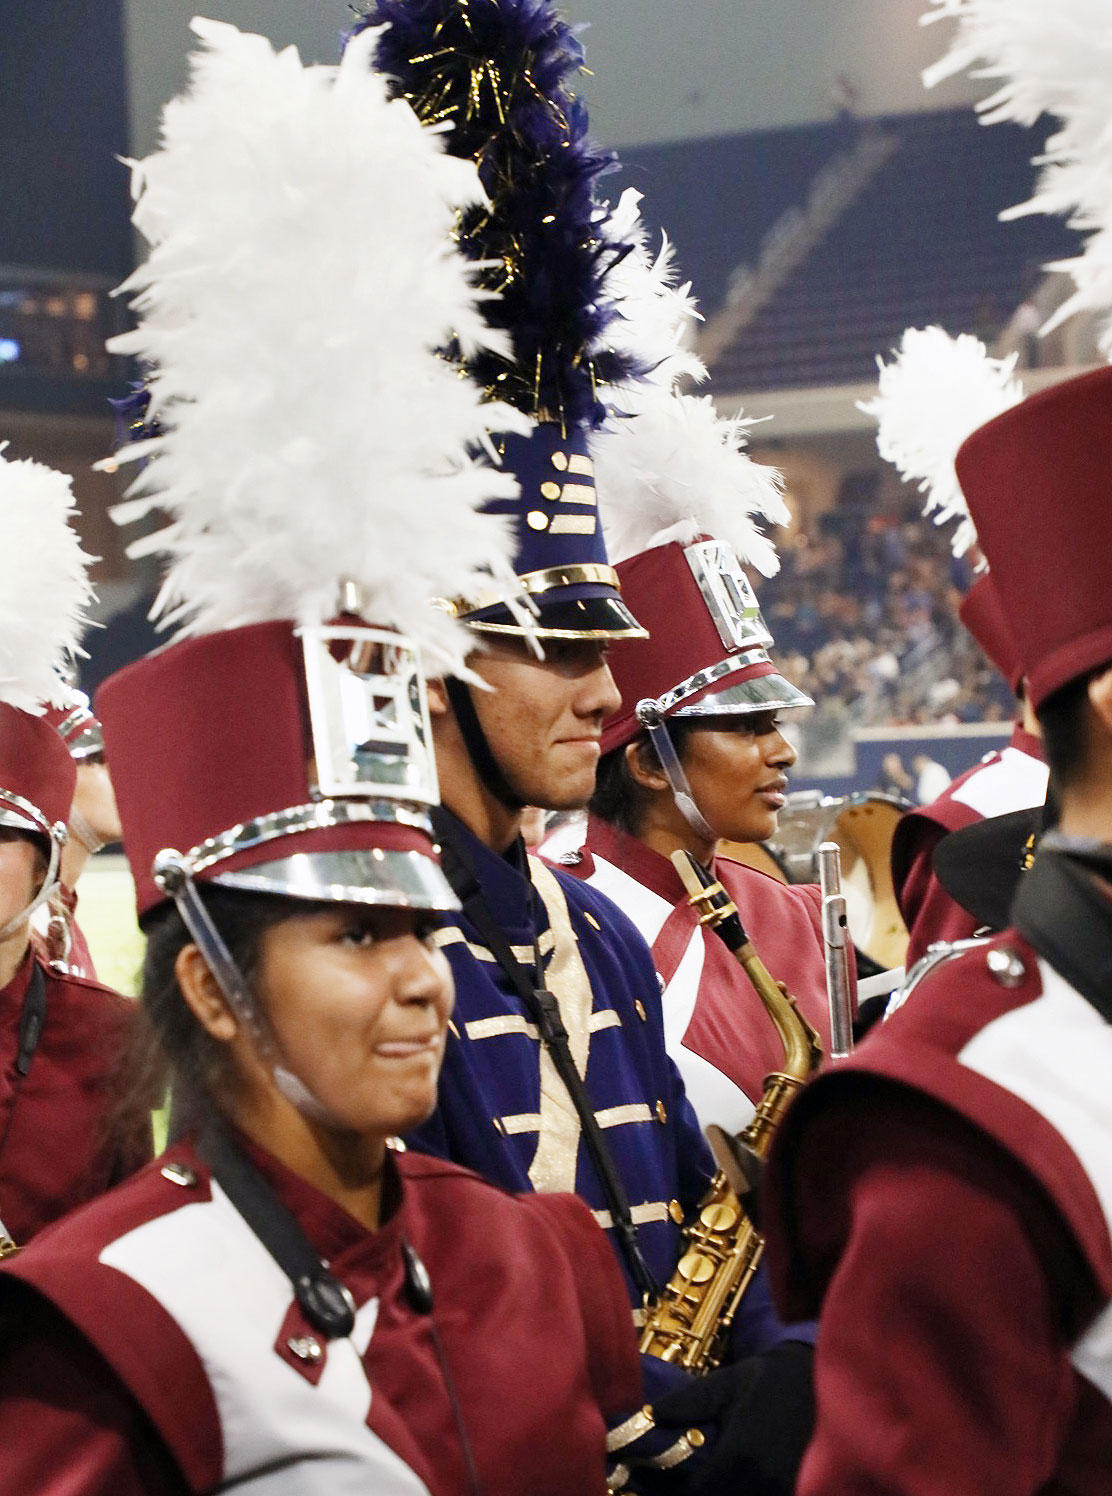 Plano Senior and Eastwood band members performed together